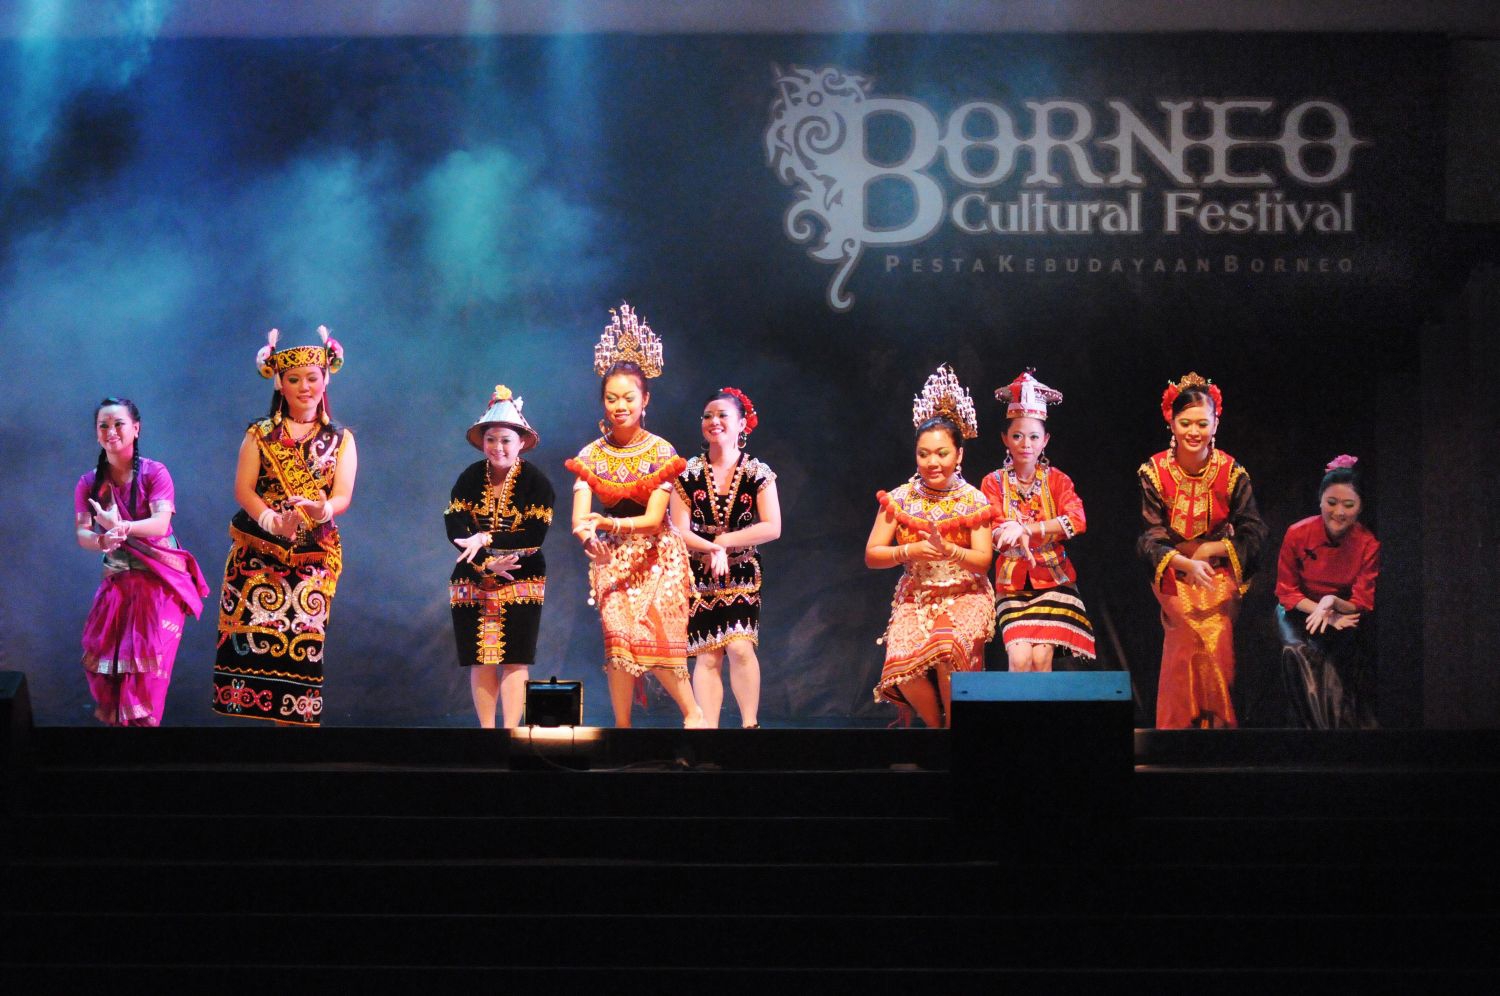 A multi-cultural stage show